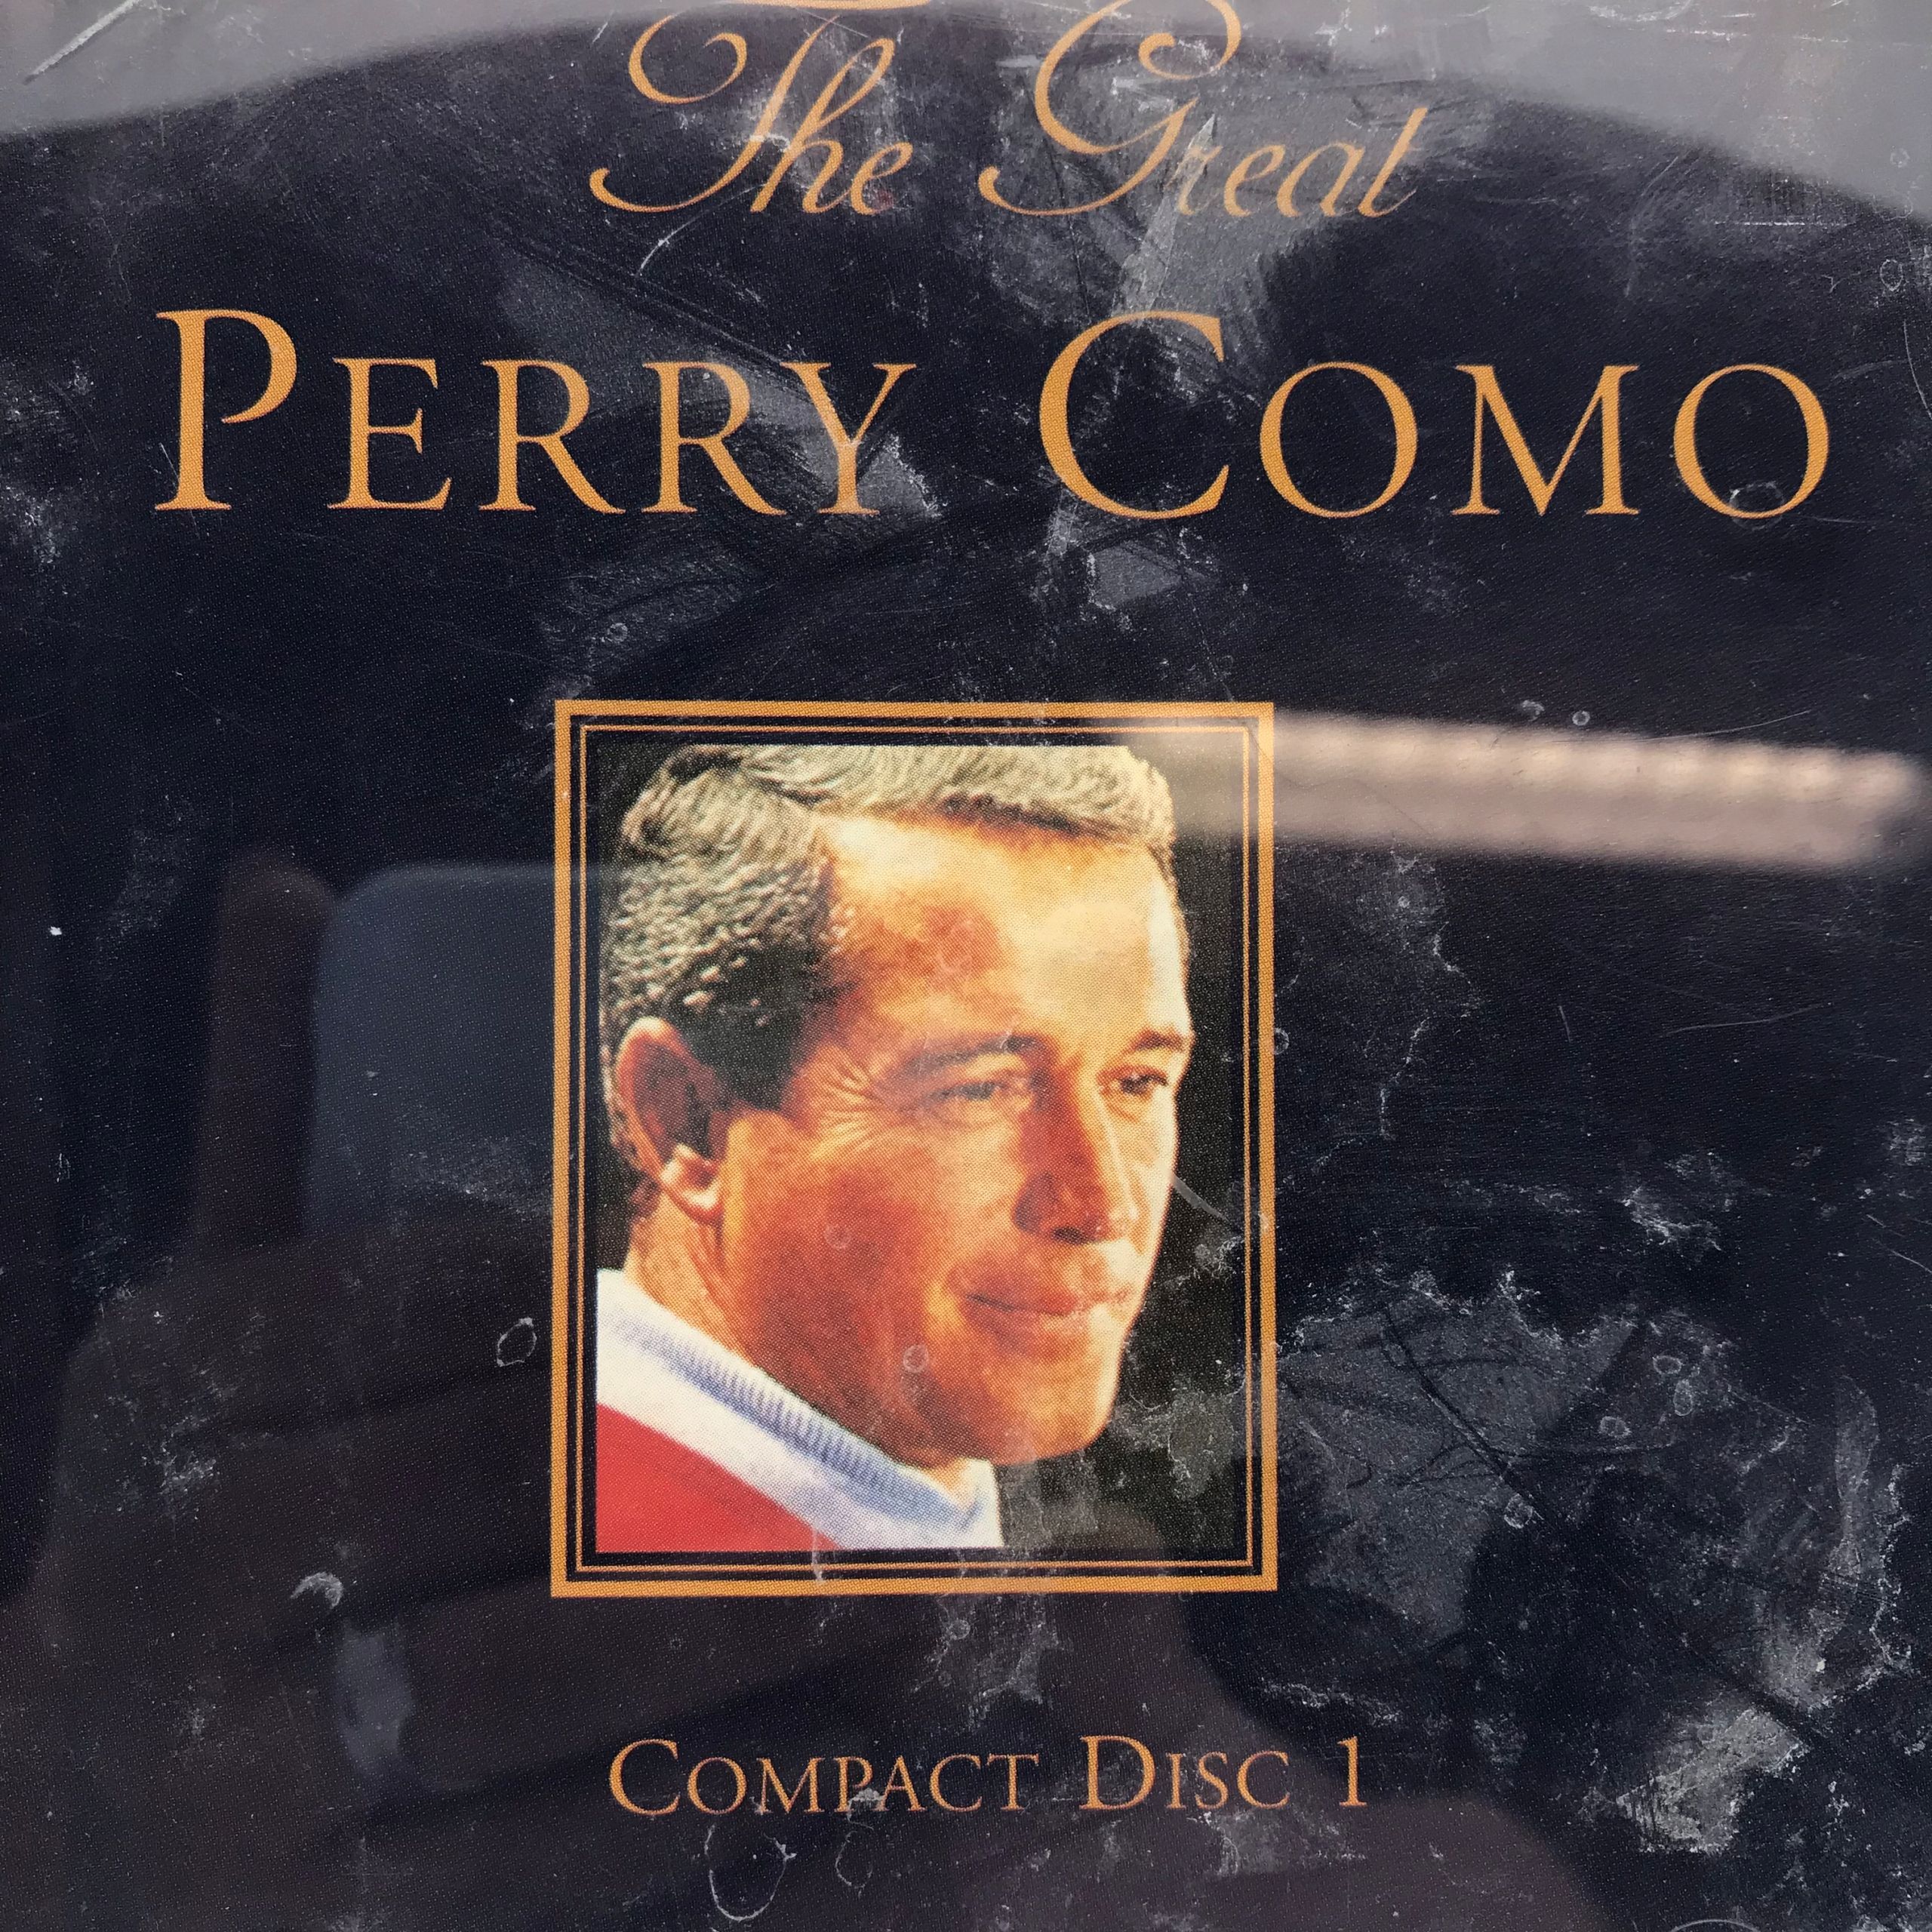 Cd - Perry Como - The Great 1